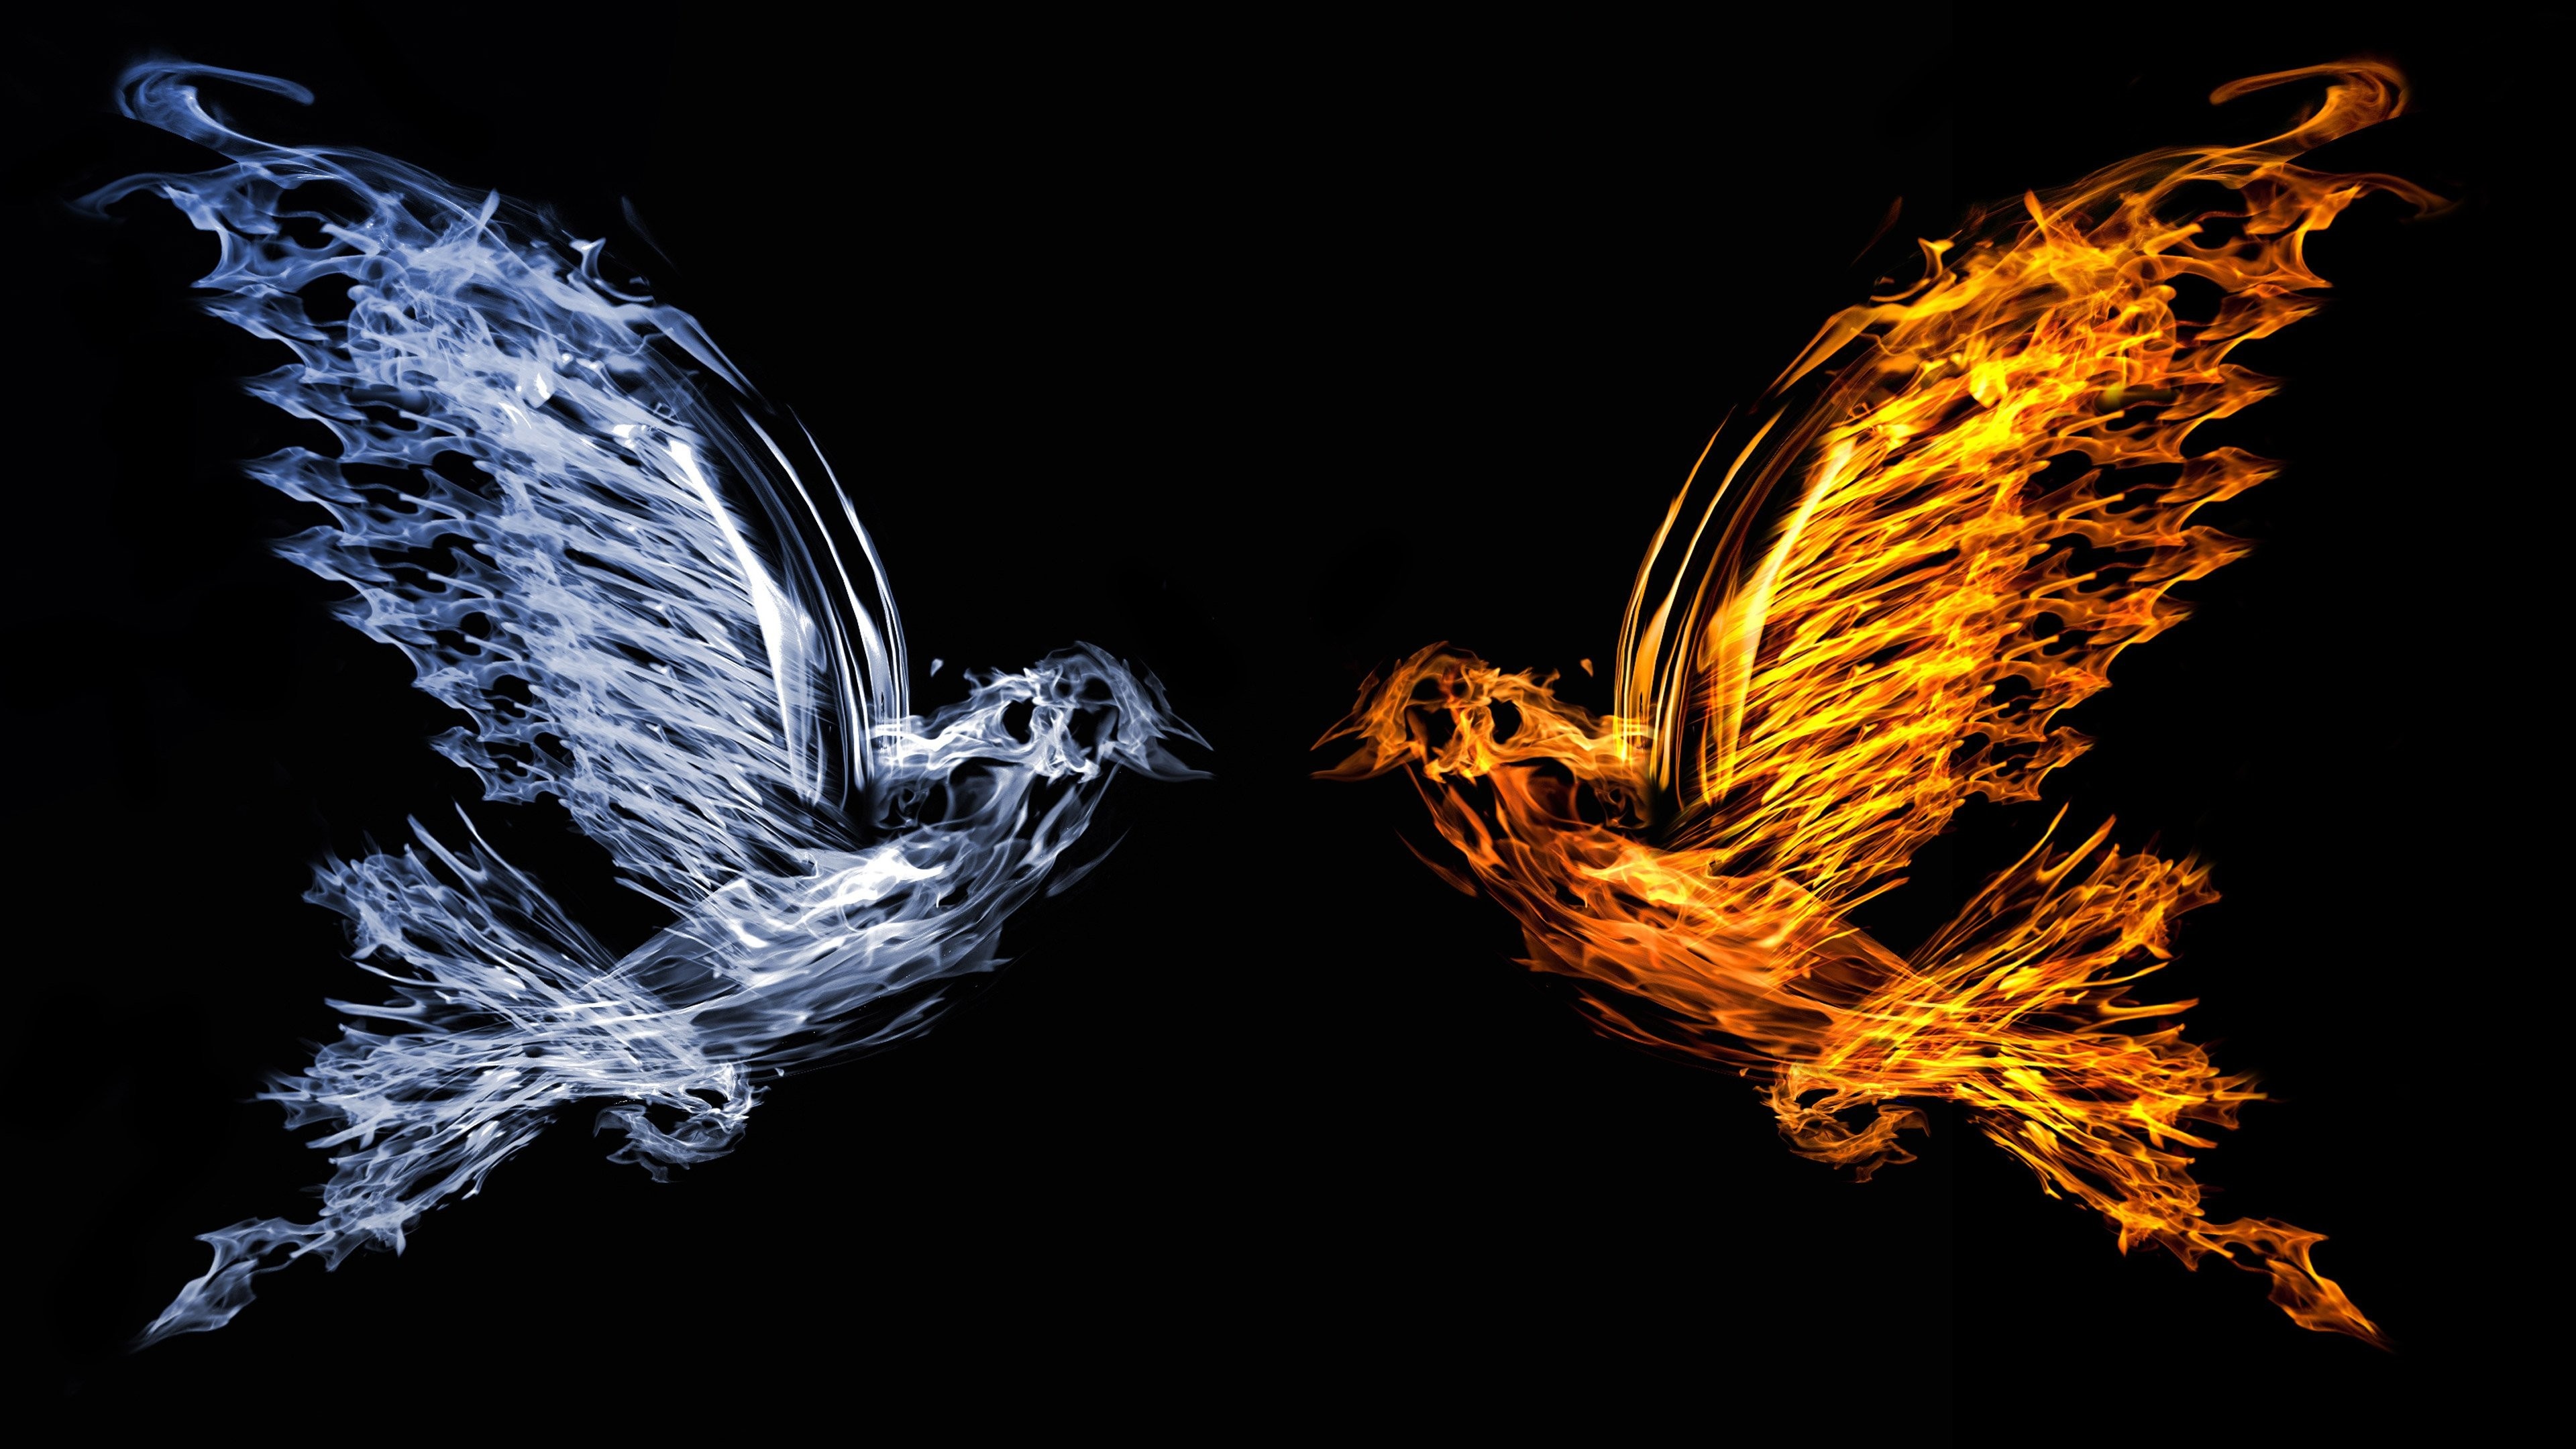 Artistic interpretation, Fire and water fusion, Abstract bird silhouette, Dynamic energy, Captivating colors, 3840x2160 4K Desktop